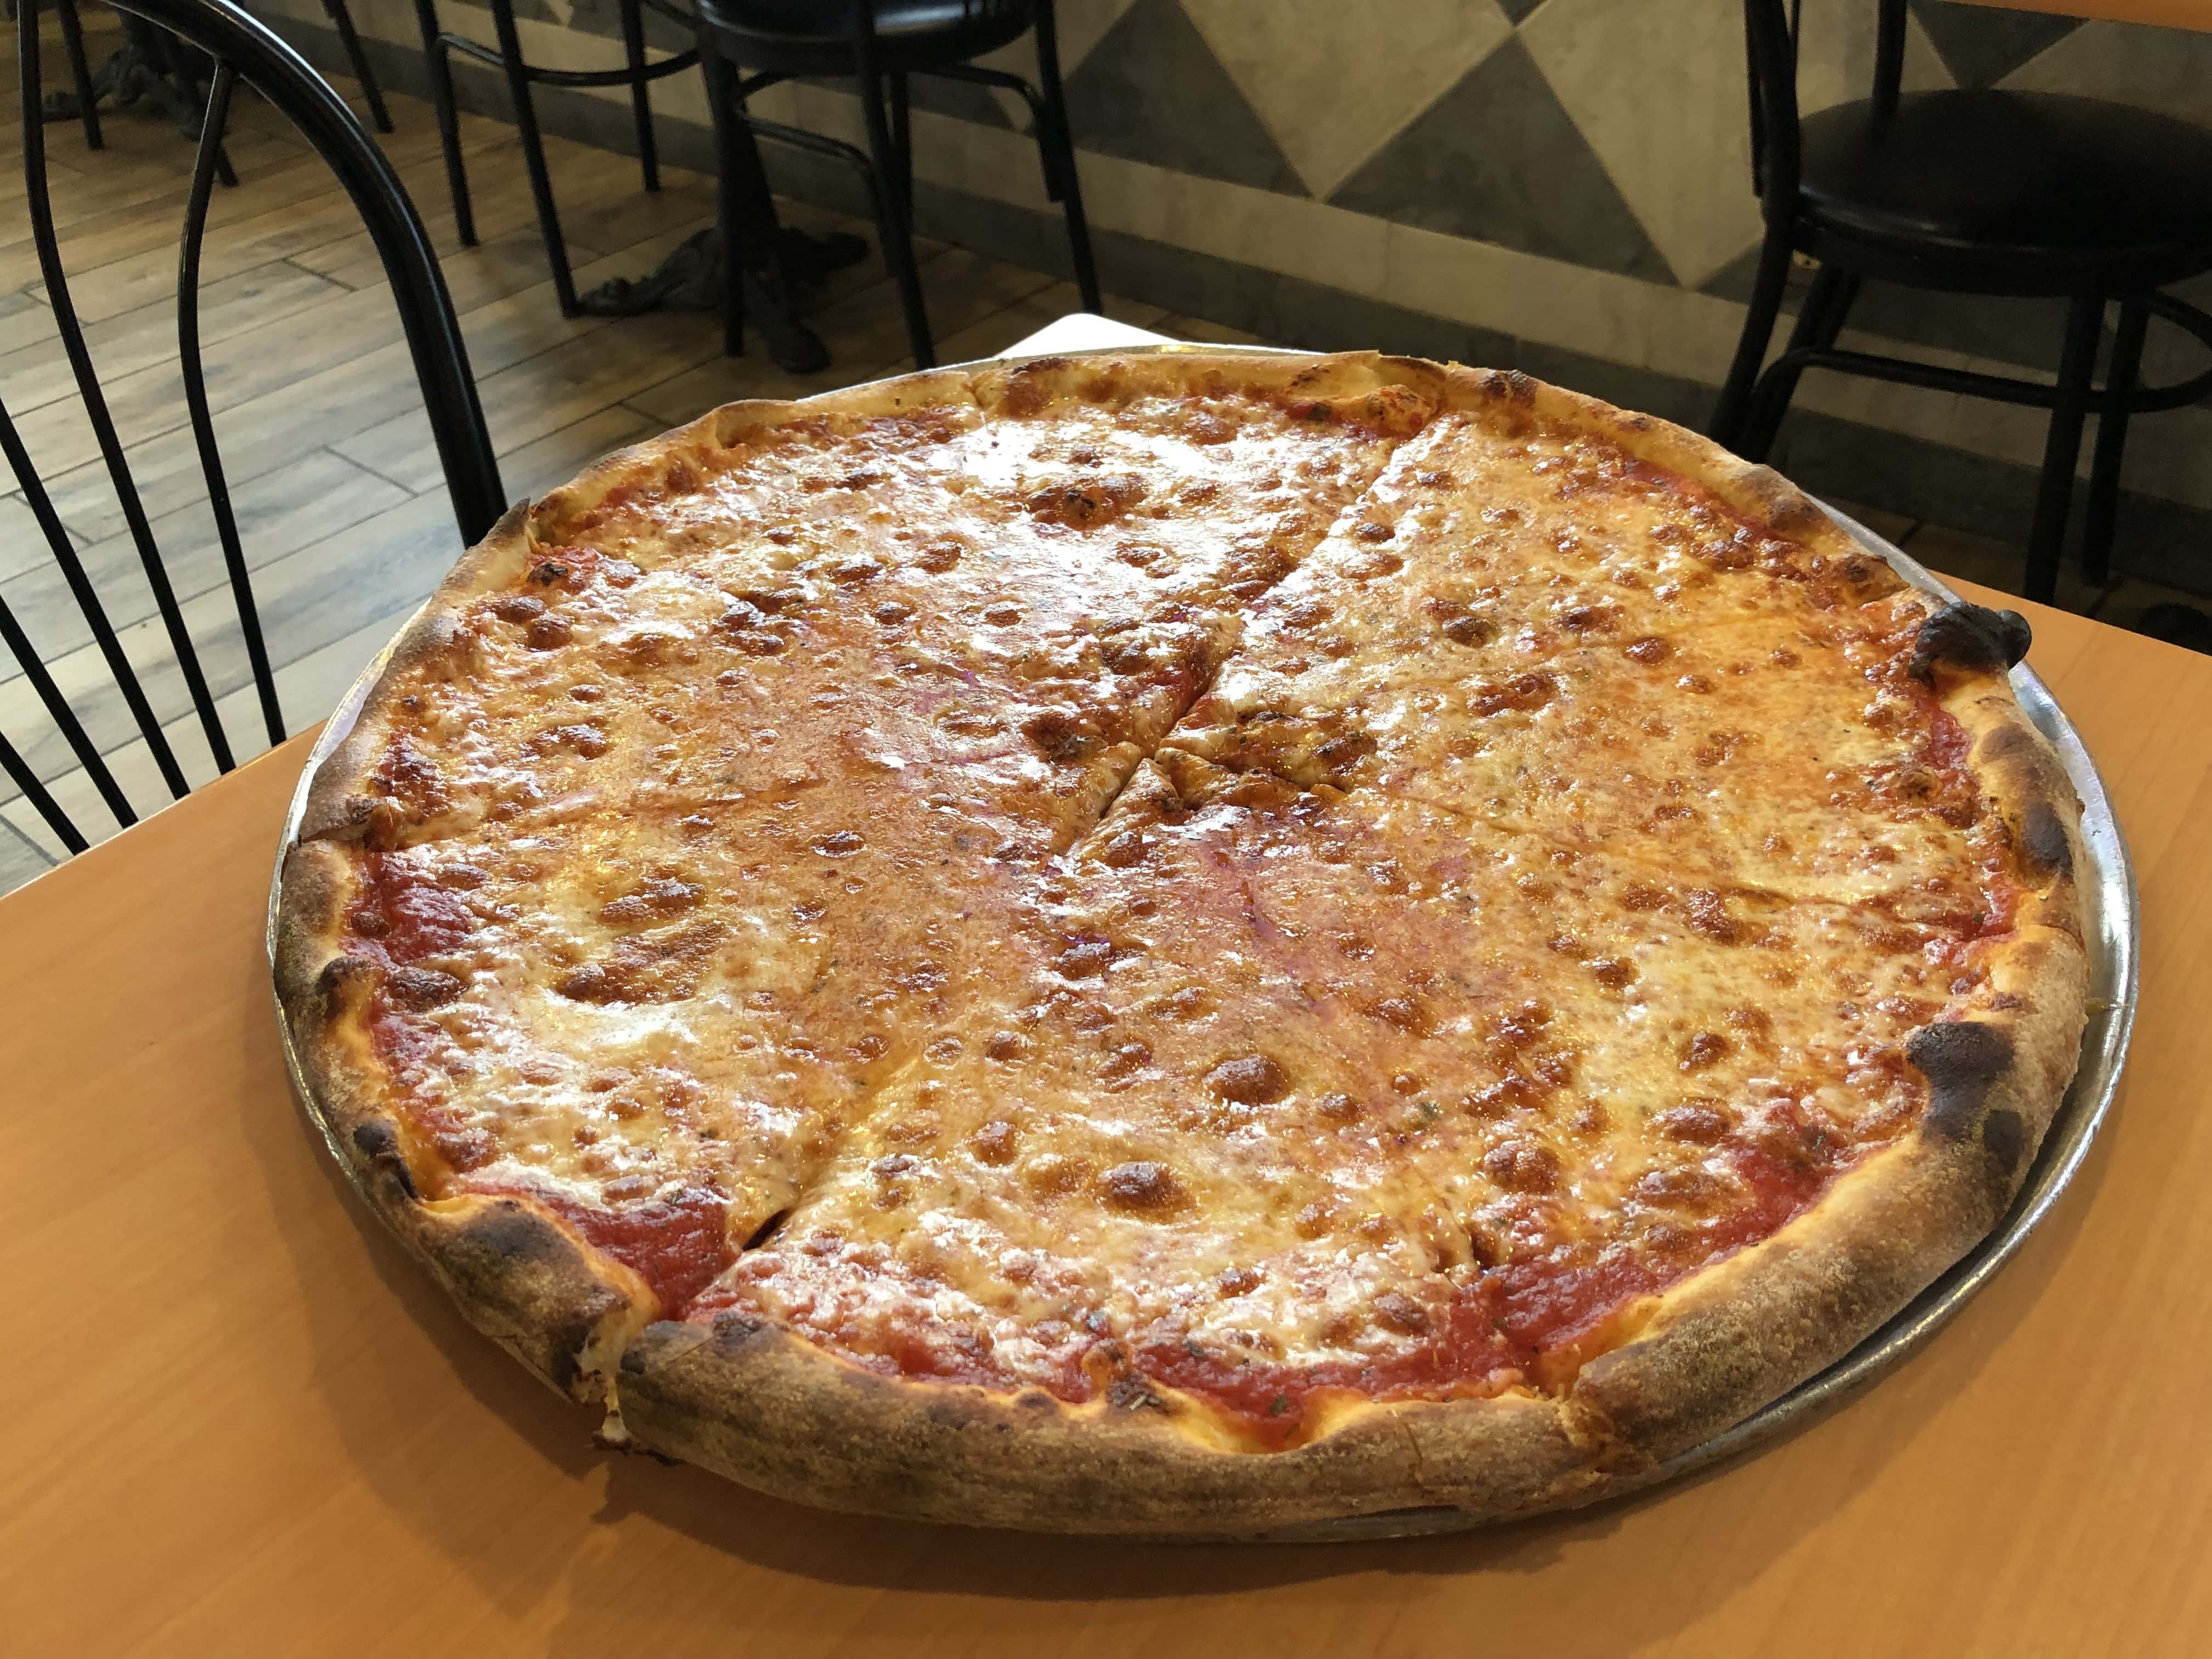 Angoletto Pizzeria - New Hyde Park, NY, US, nearest pizza delivery to me